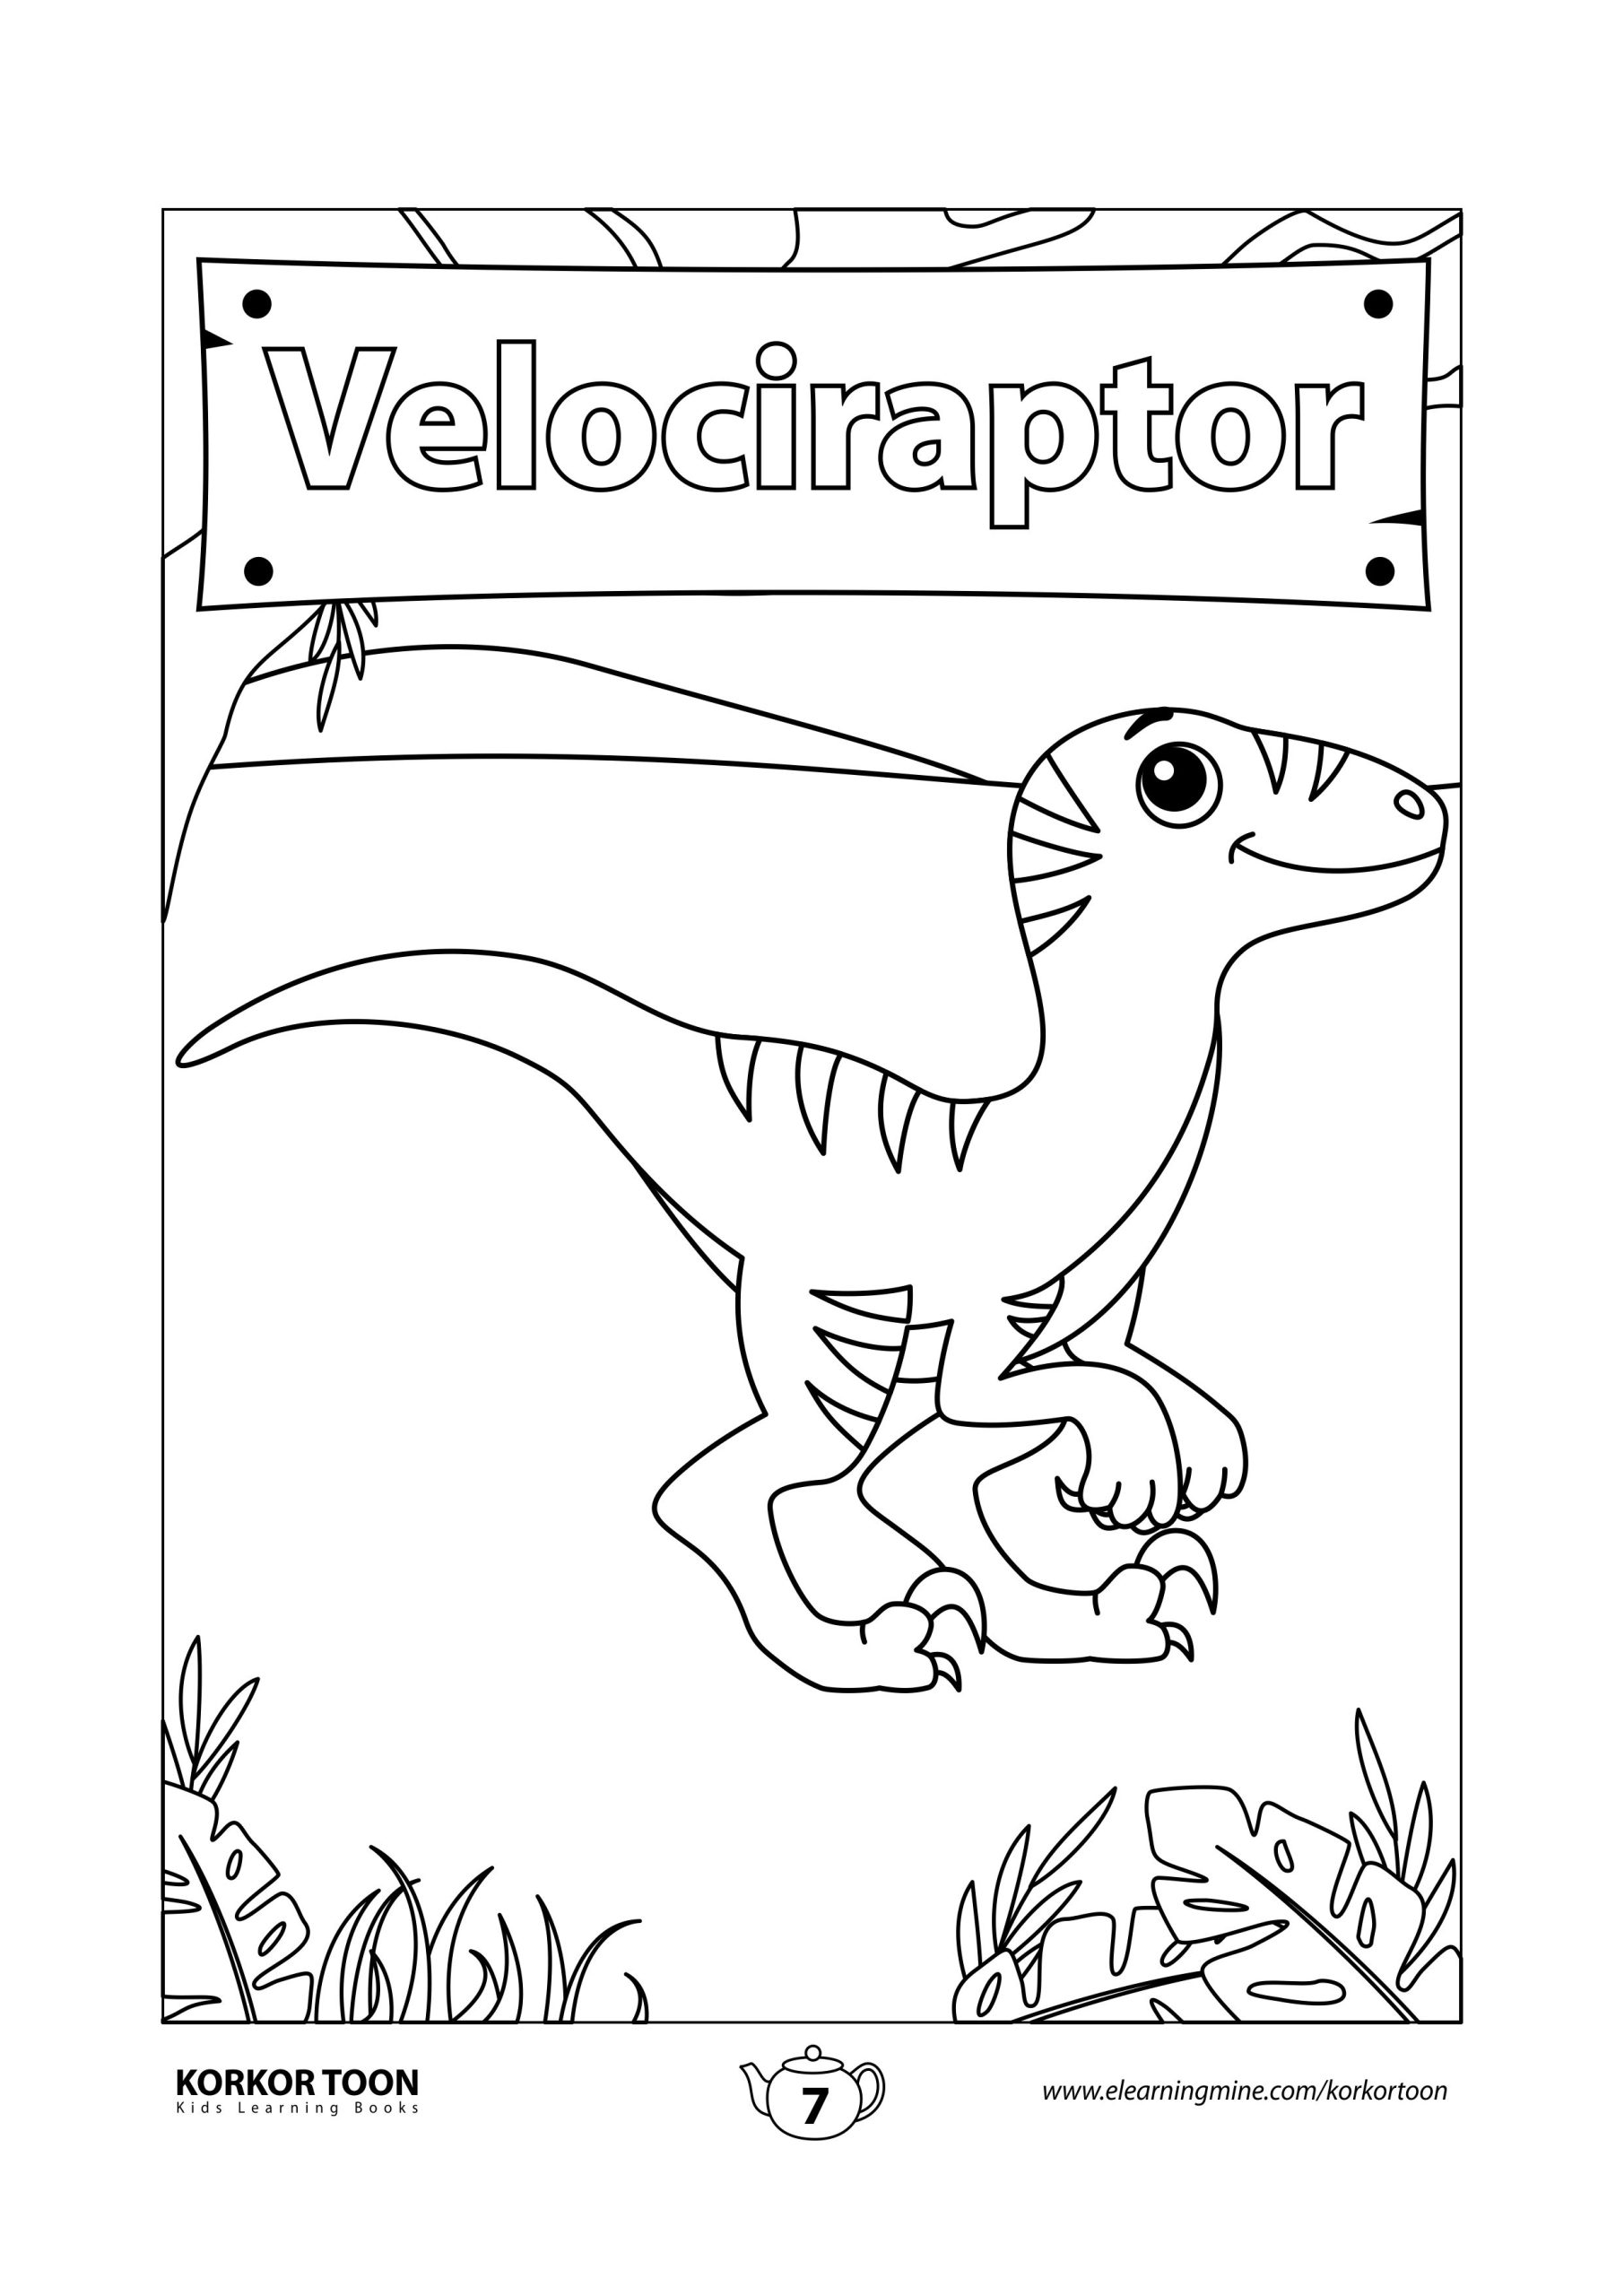 Dinosaurs Coloring Book for Kids | Velociraptor Coloring Page